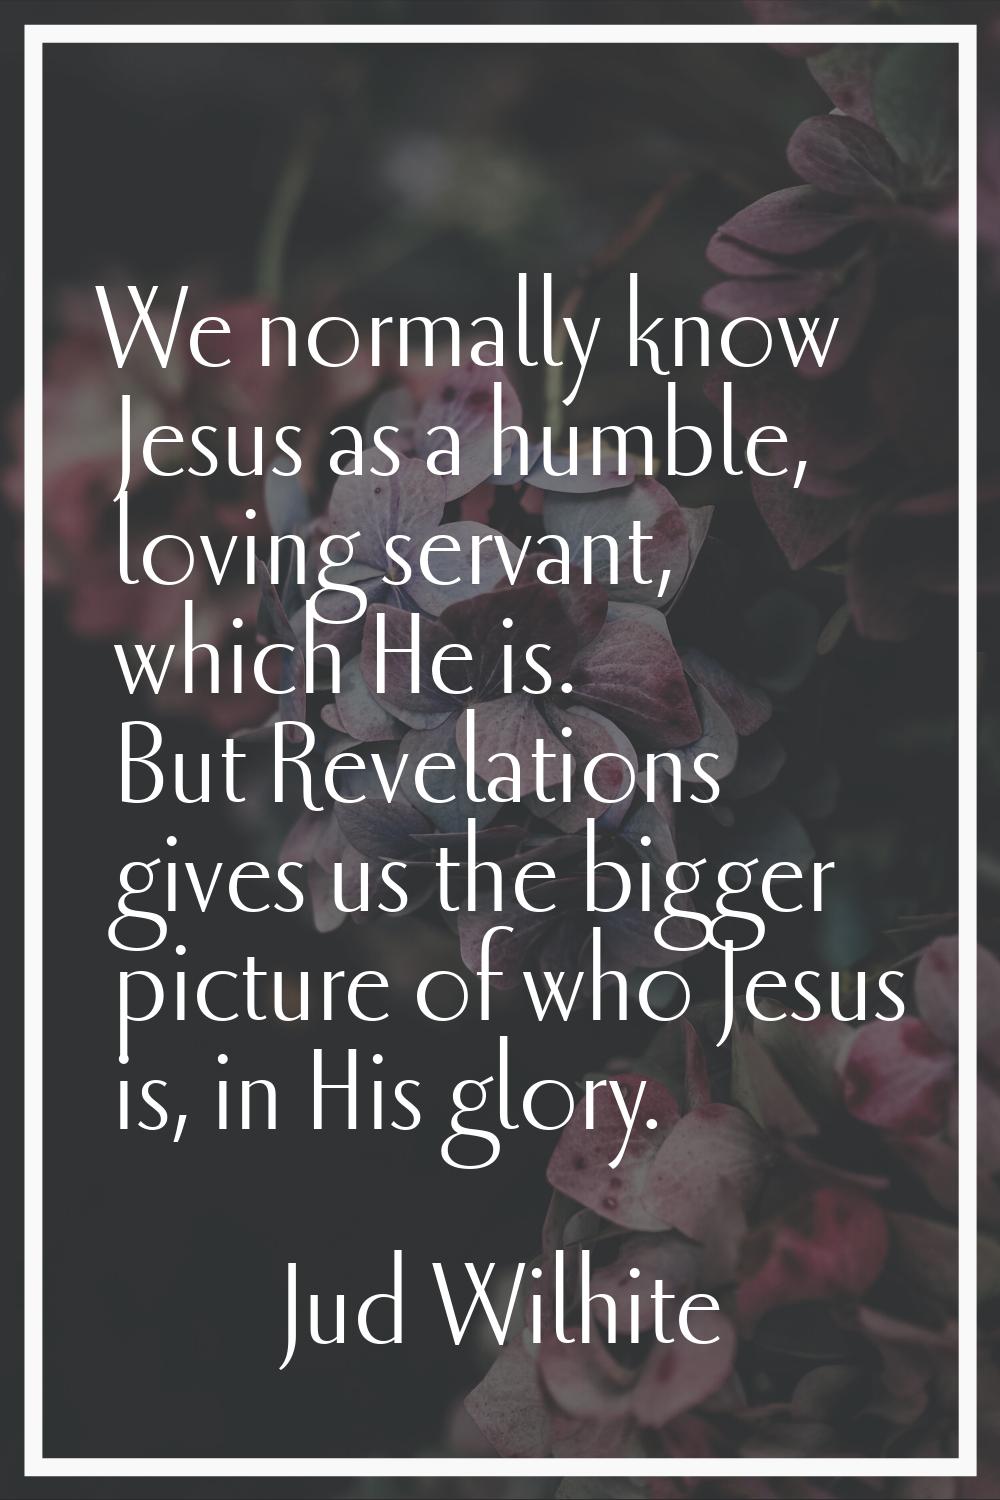 We normally know Jesus as a humble, loving servant, which He is. But Revelations gives us the bigge